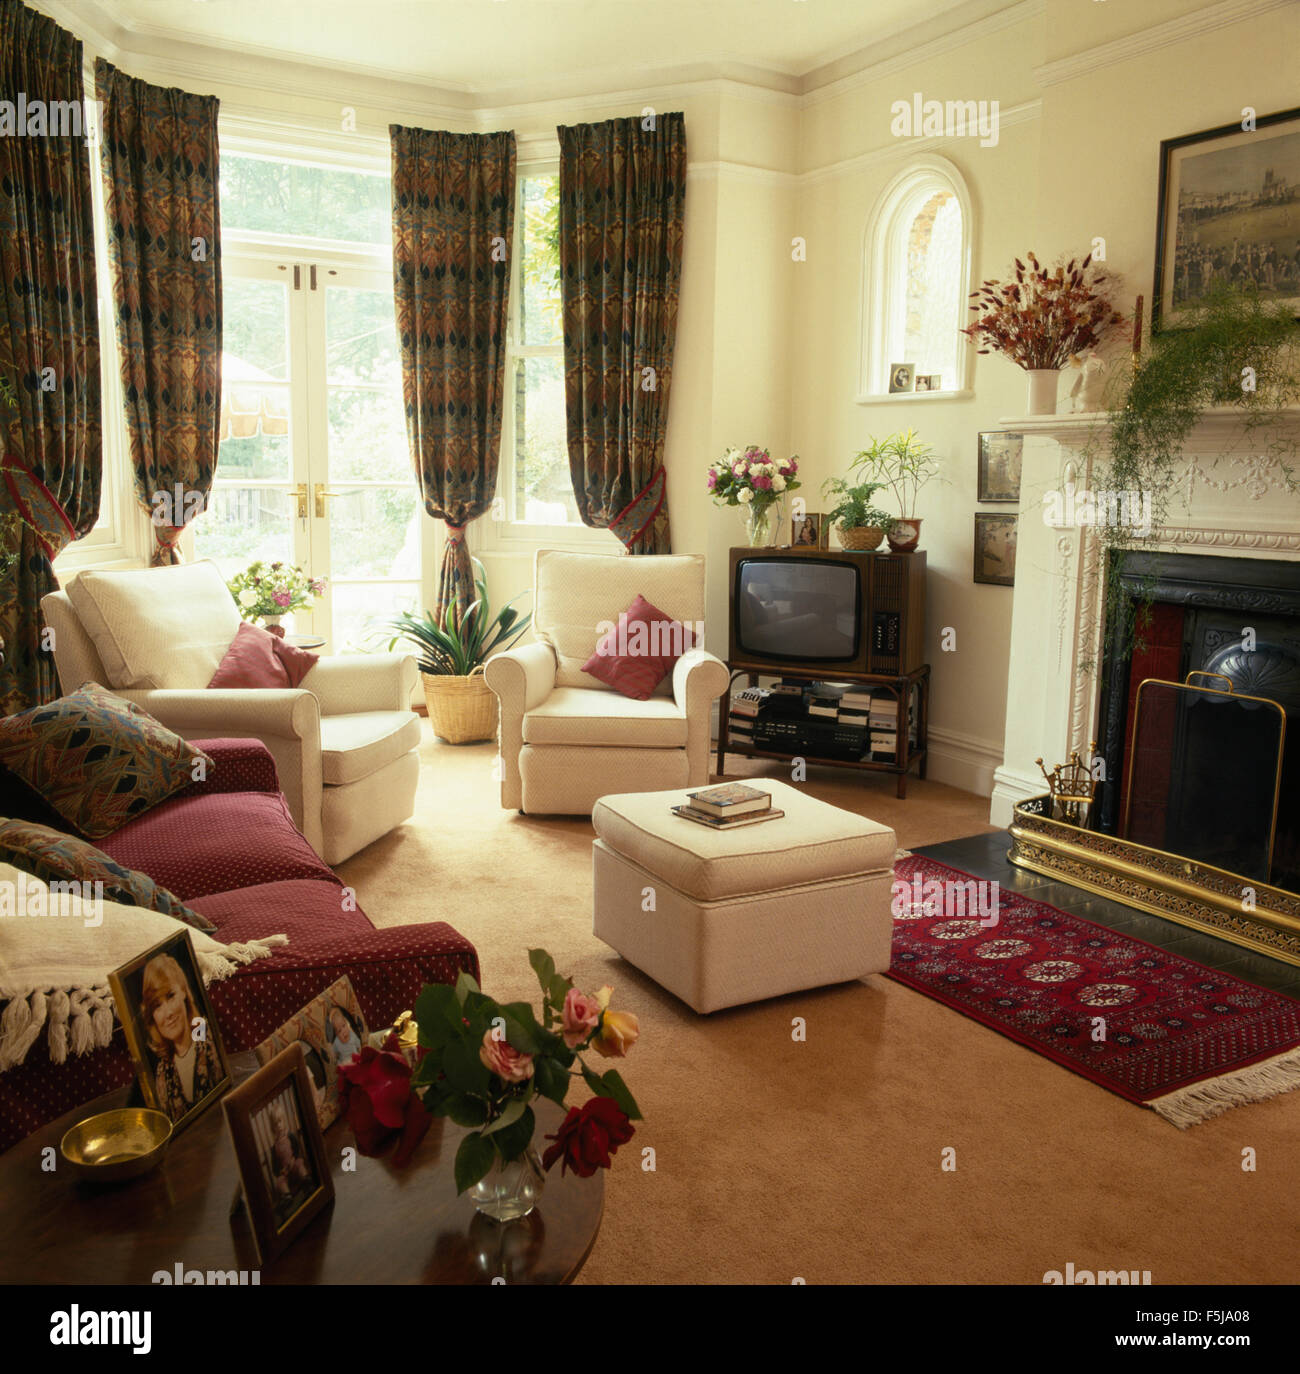 Cream armchairs and ottoman in an eighties townhouse sitting room with dark drapes on the French windows Stock Photo